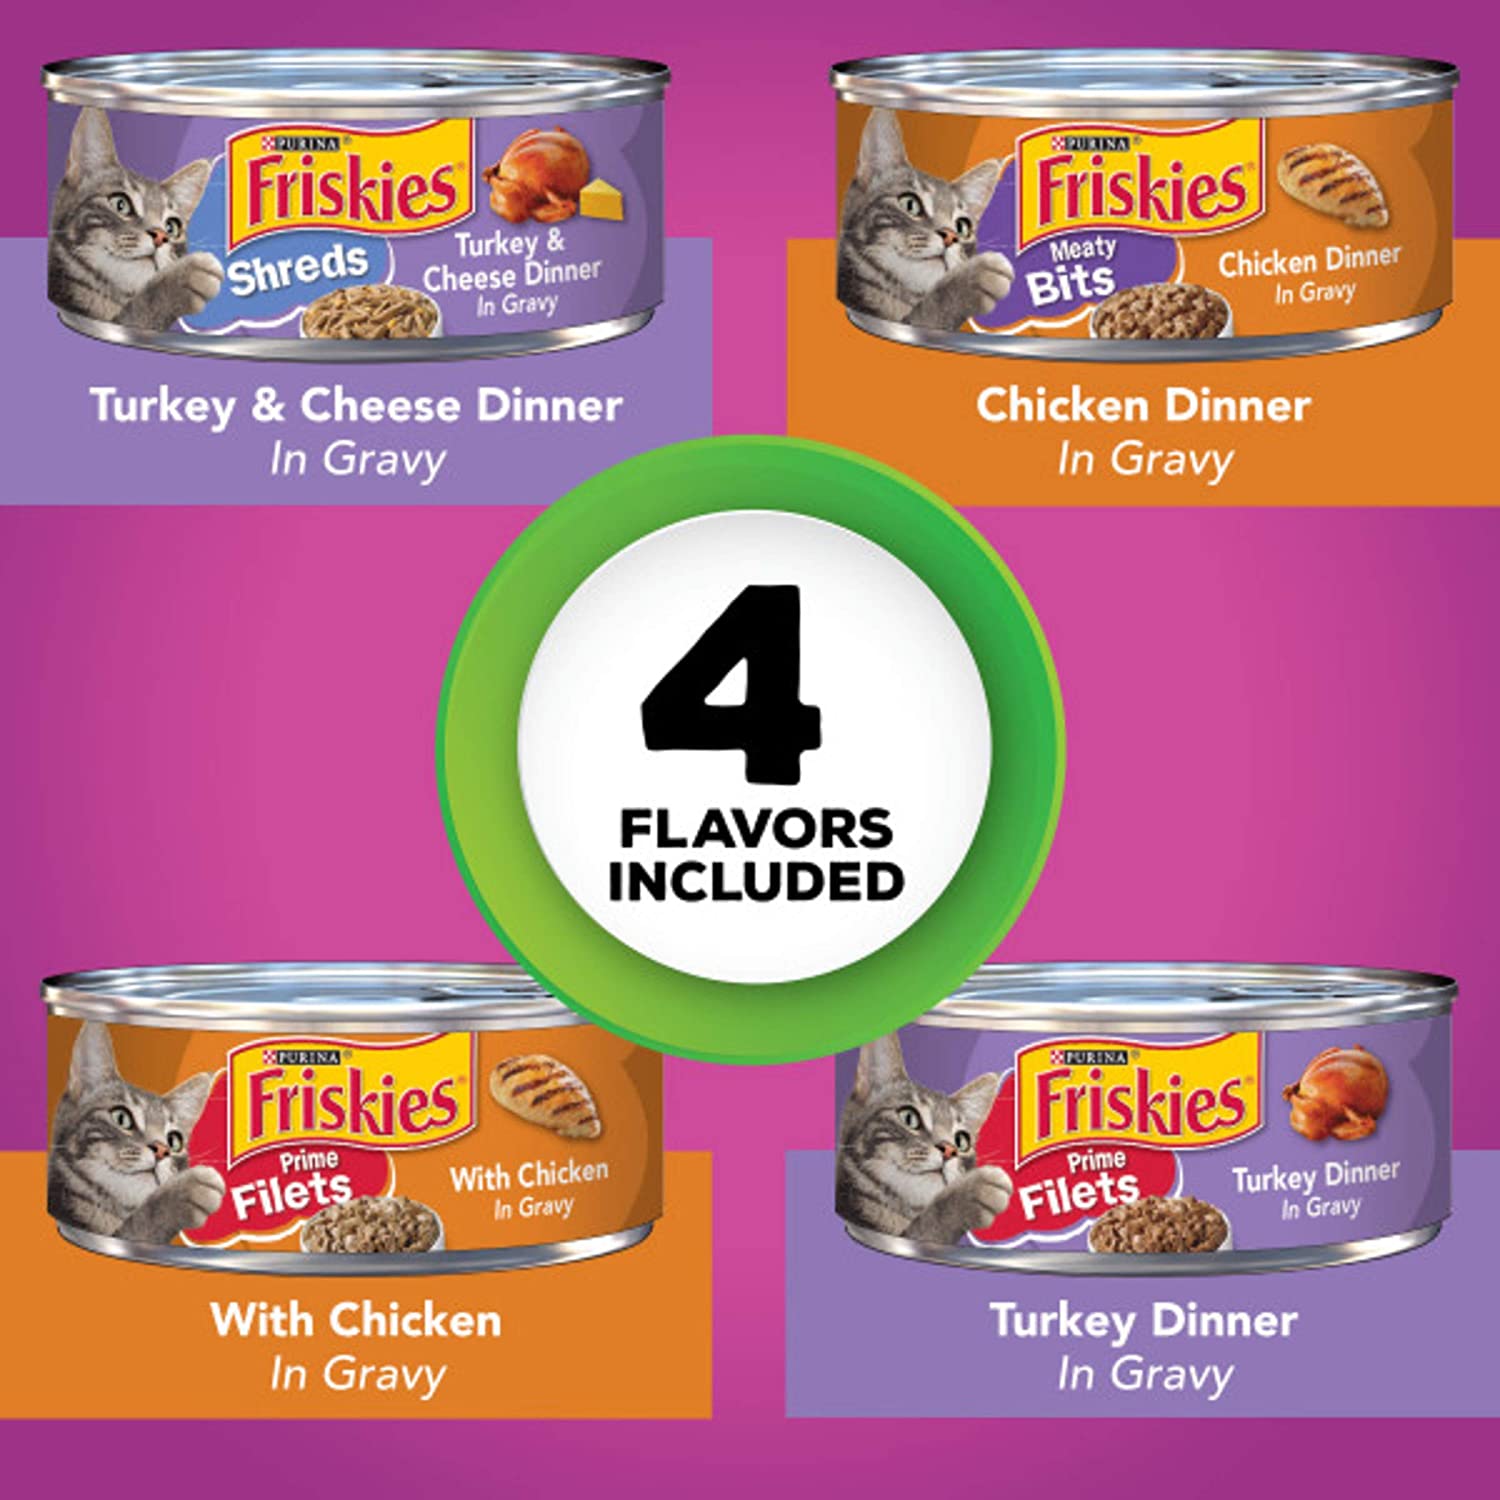 Purina Friskies Gravy Wet Cat Food Variety Pack, Poultry Shreds, Meaty Bits & Prime Filets - (32) 5.5 oz. Cans